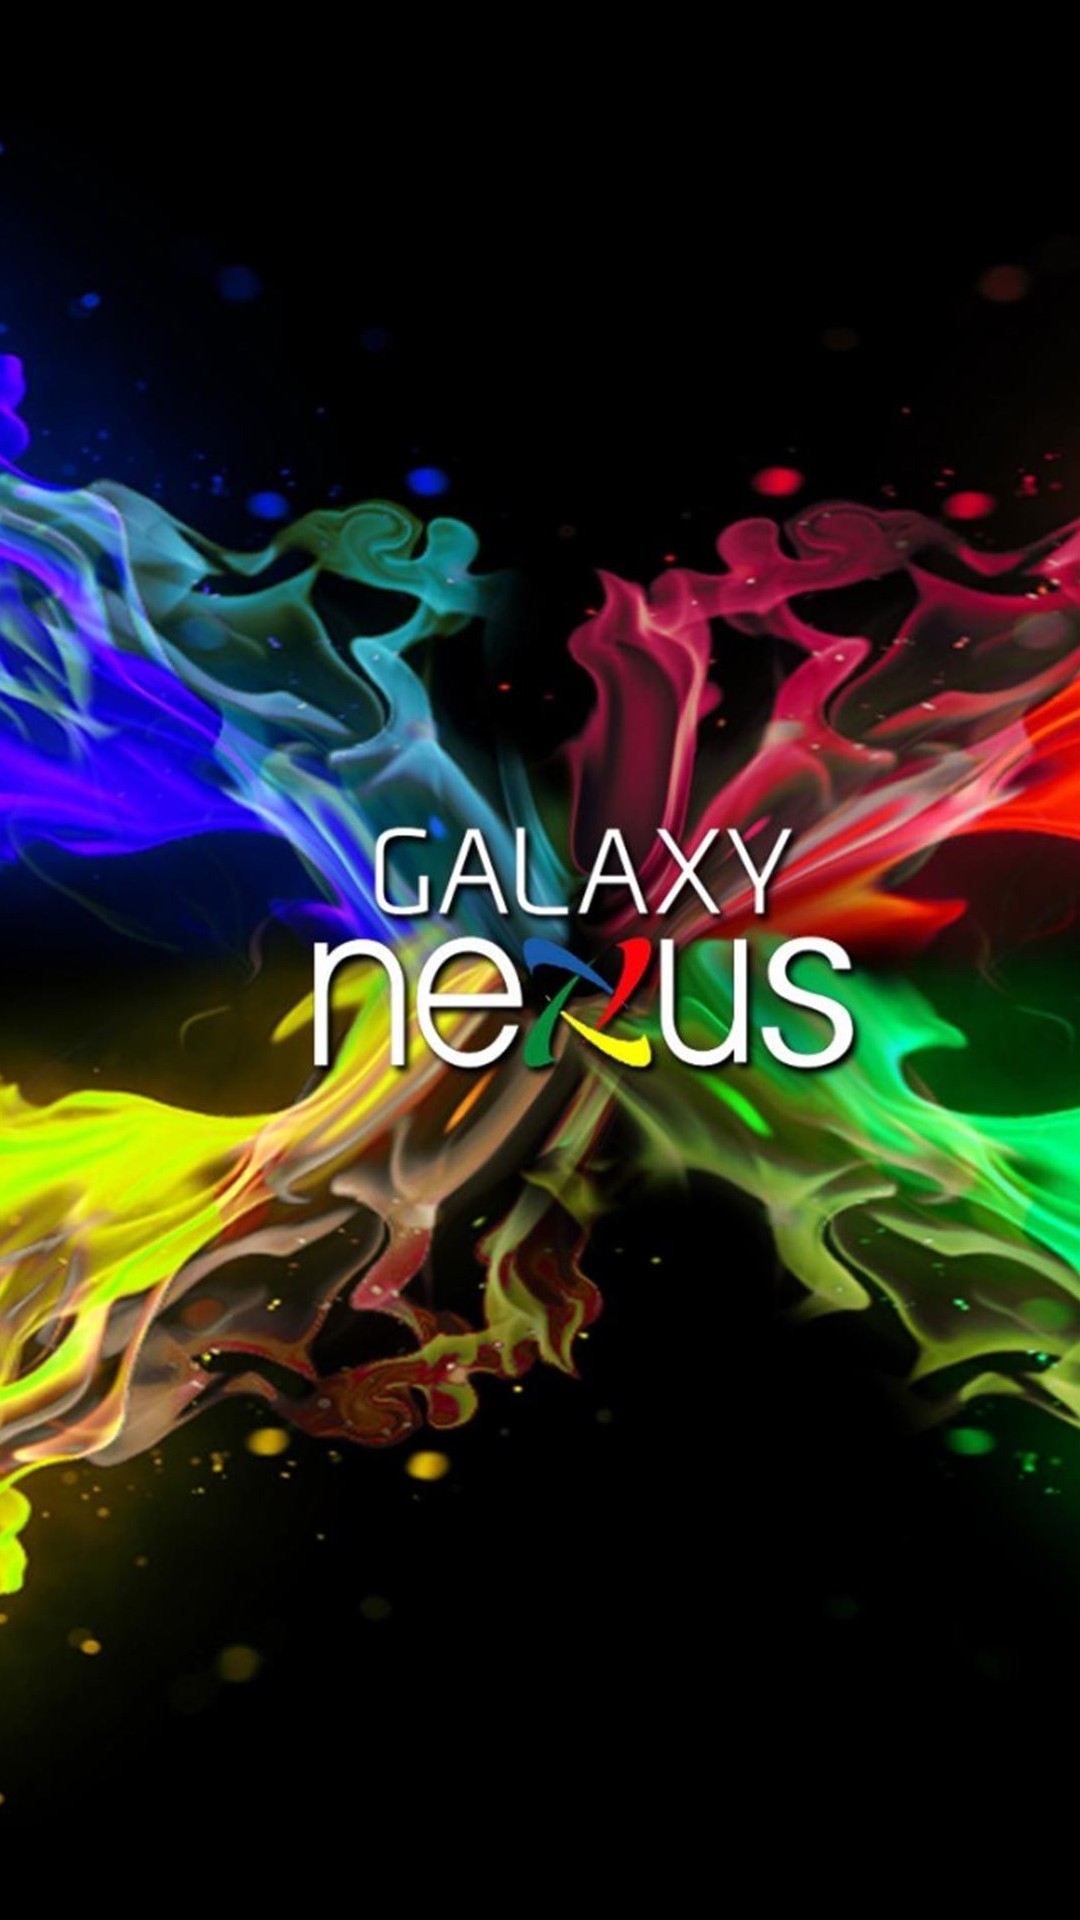 hd wallpapers for nexus 5,graphic design,text,font,design,illustration